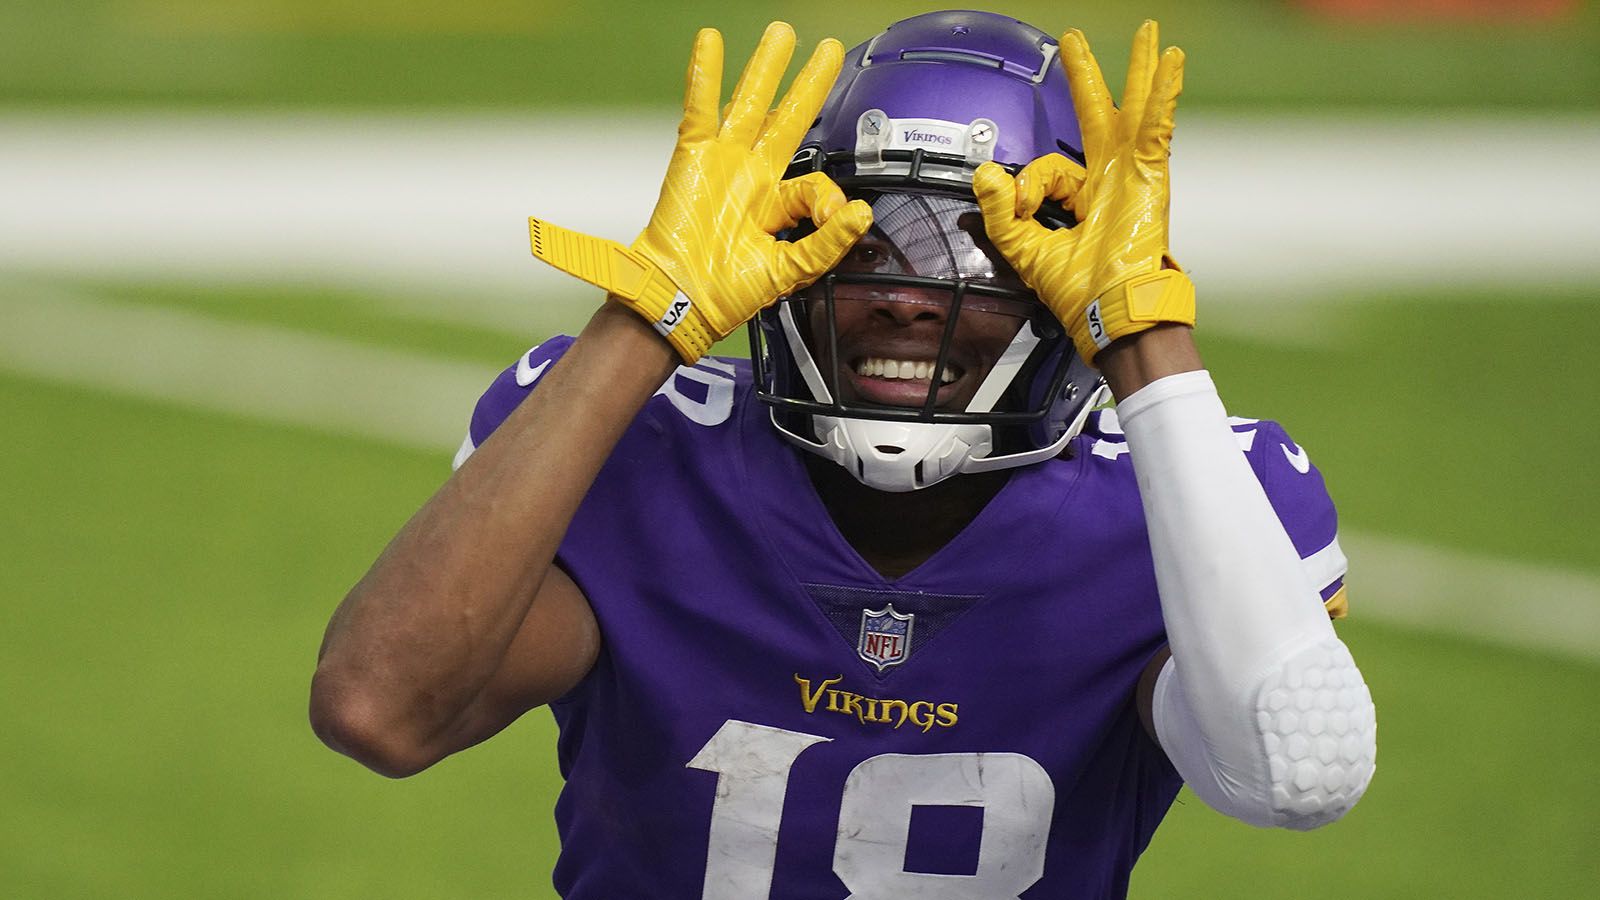 Vikings Snap Counts: Rookie Jefferson flashes star potential